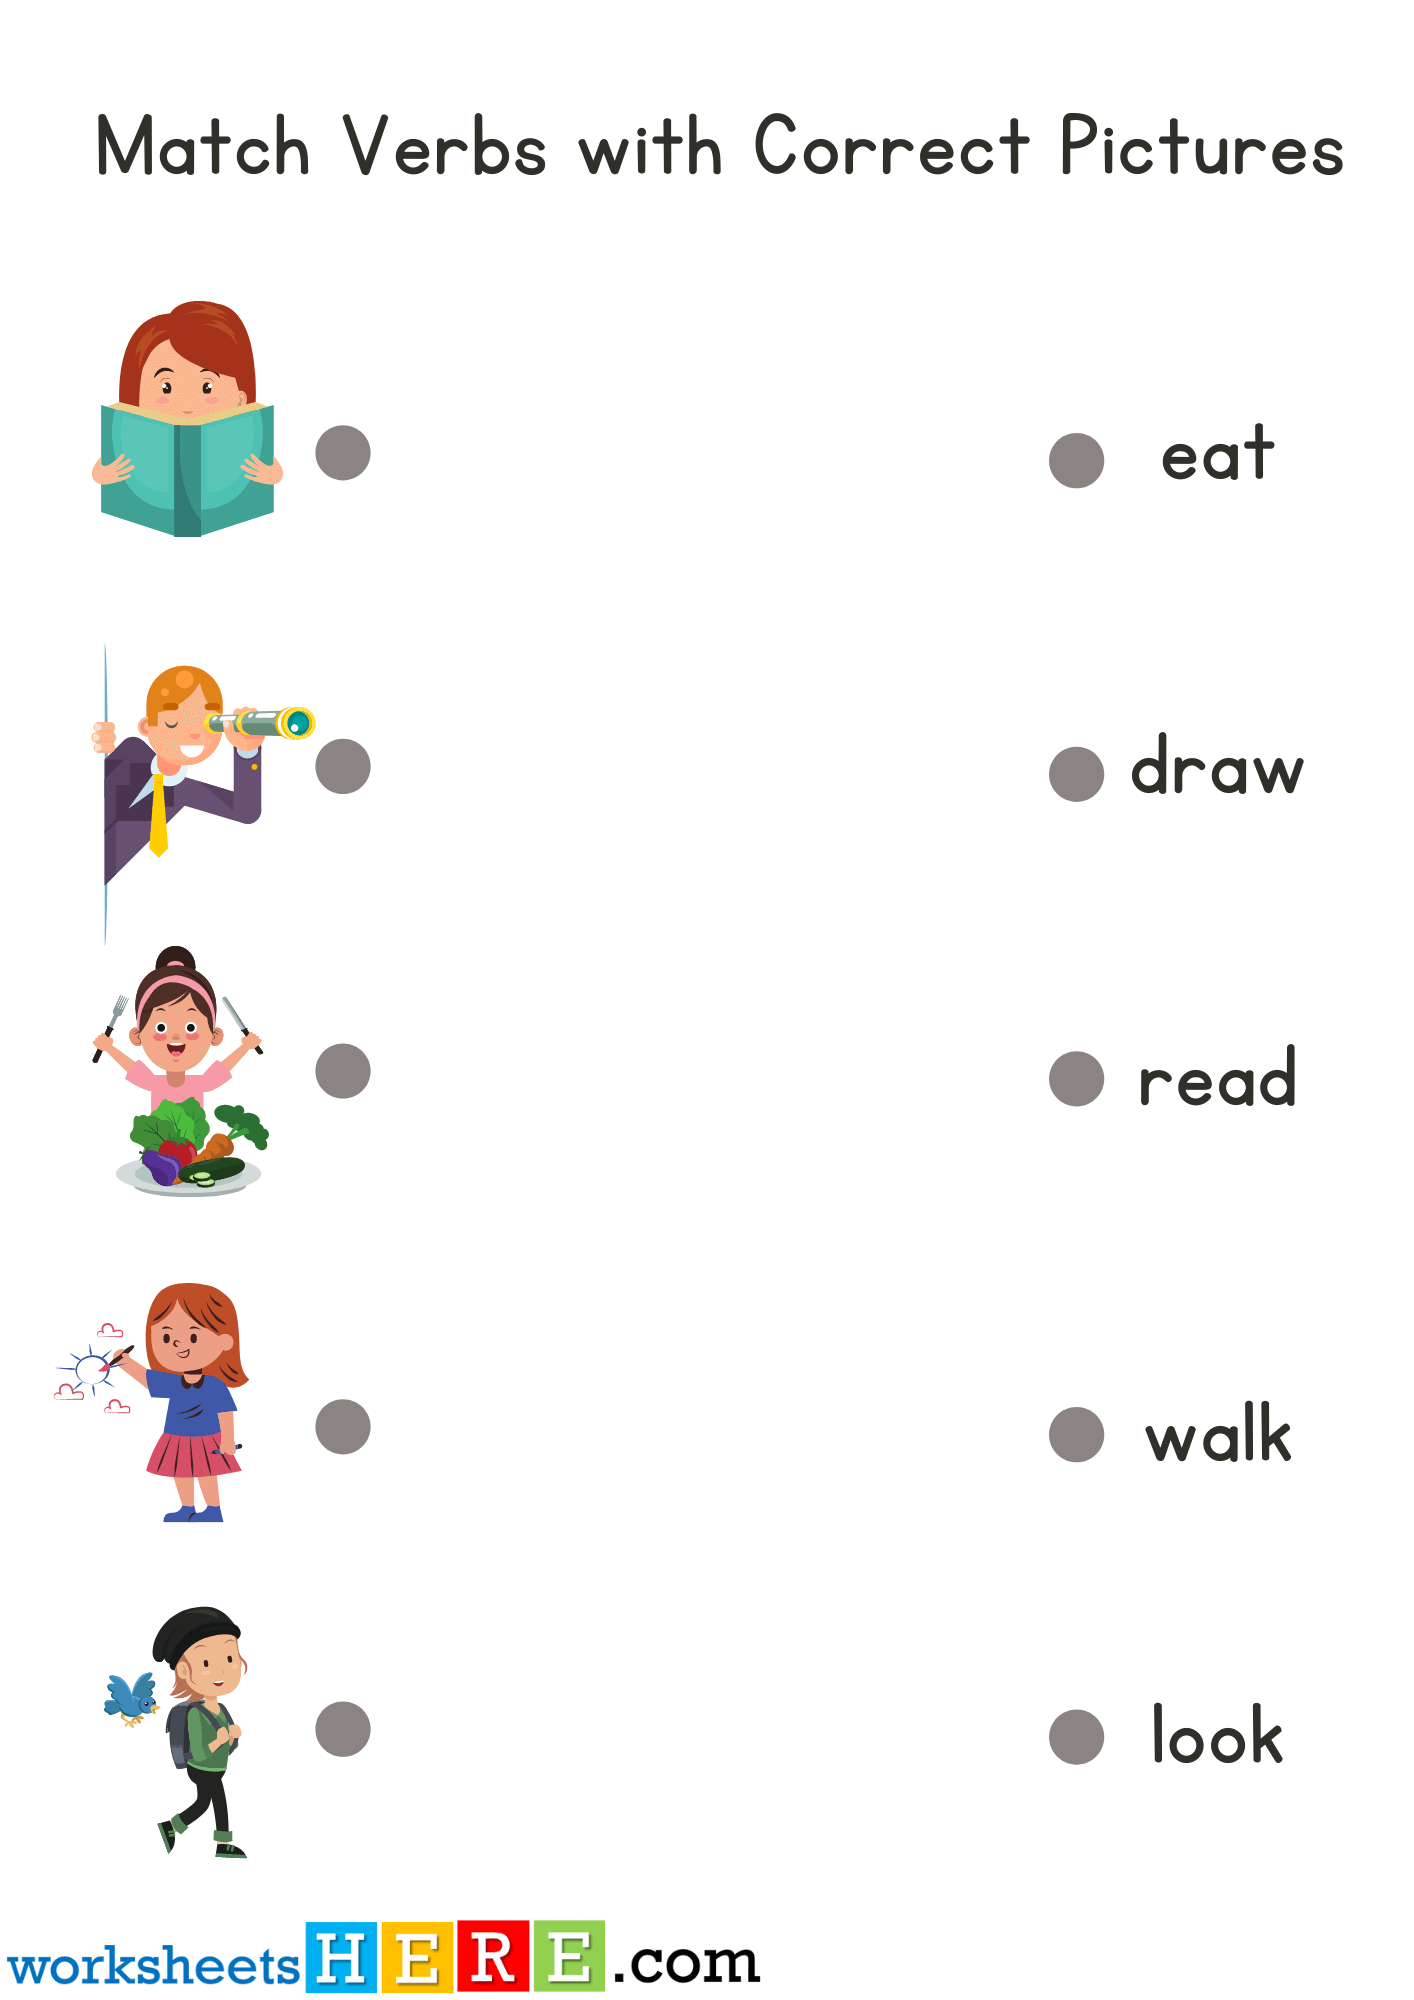 Match Verbs with Correct Pictures PDF Worksheet For Kids